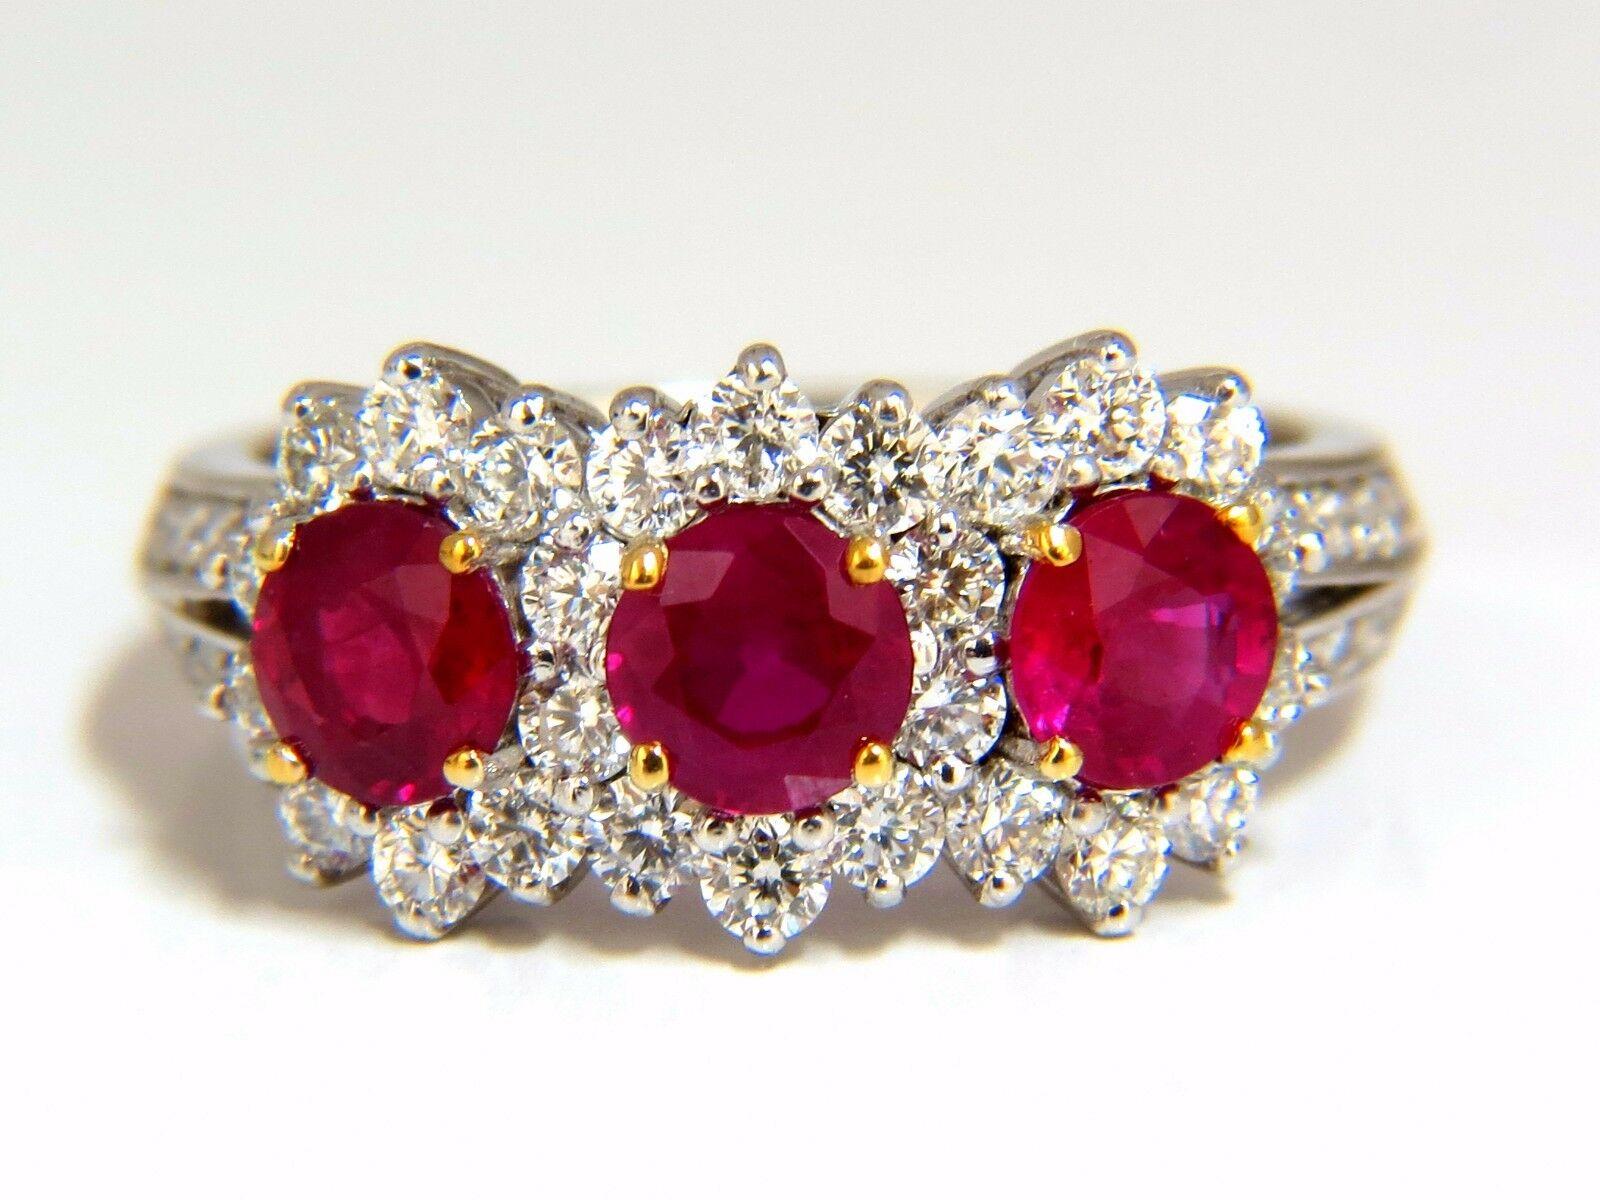 Women's or Men's 2.52ct natural vivid red ruby diamonds ring 14kt three stone halo class For Sale